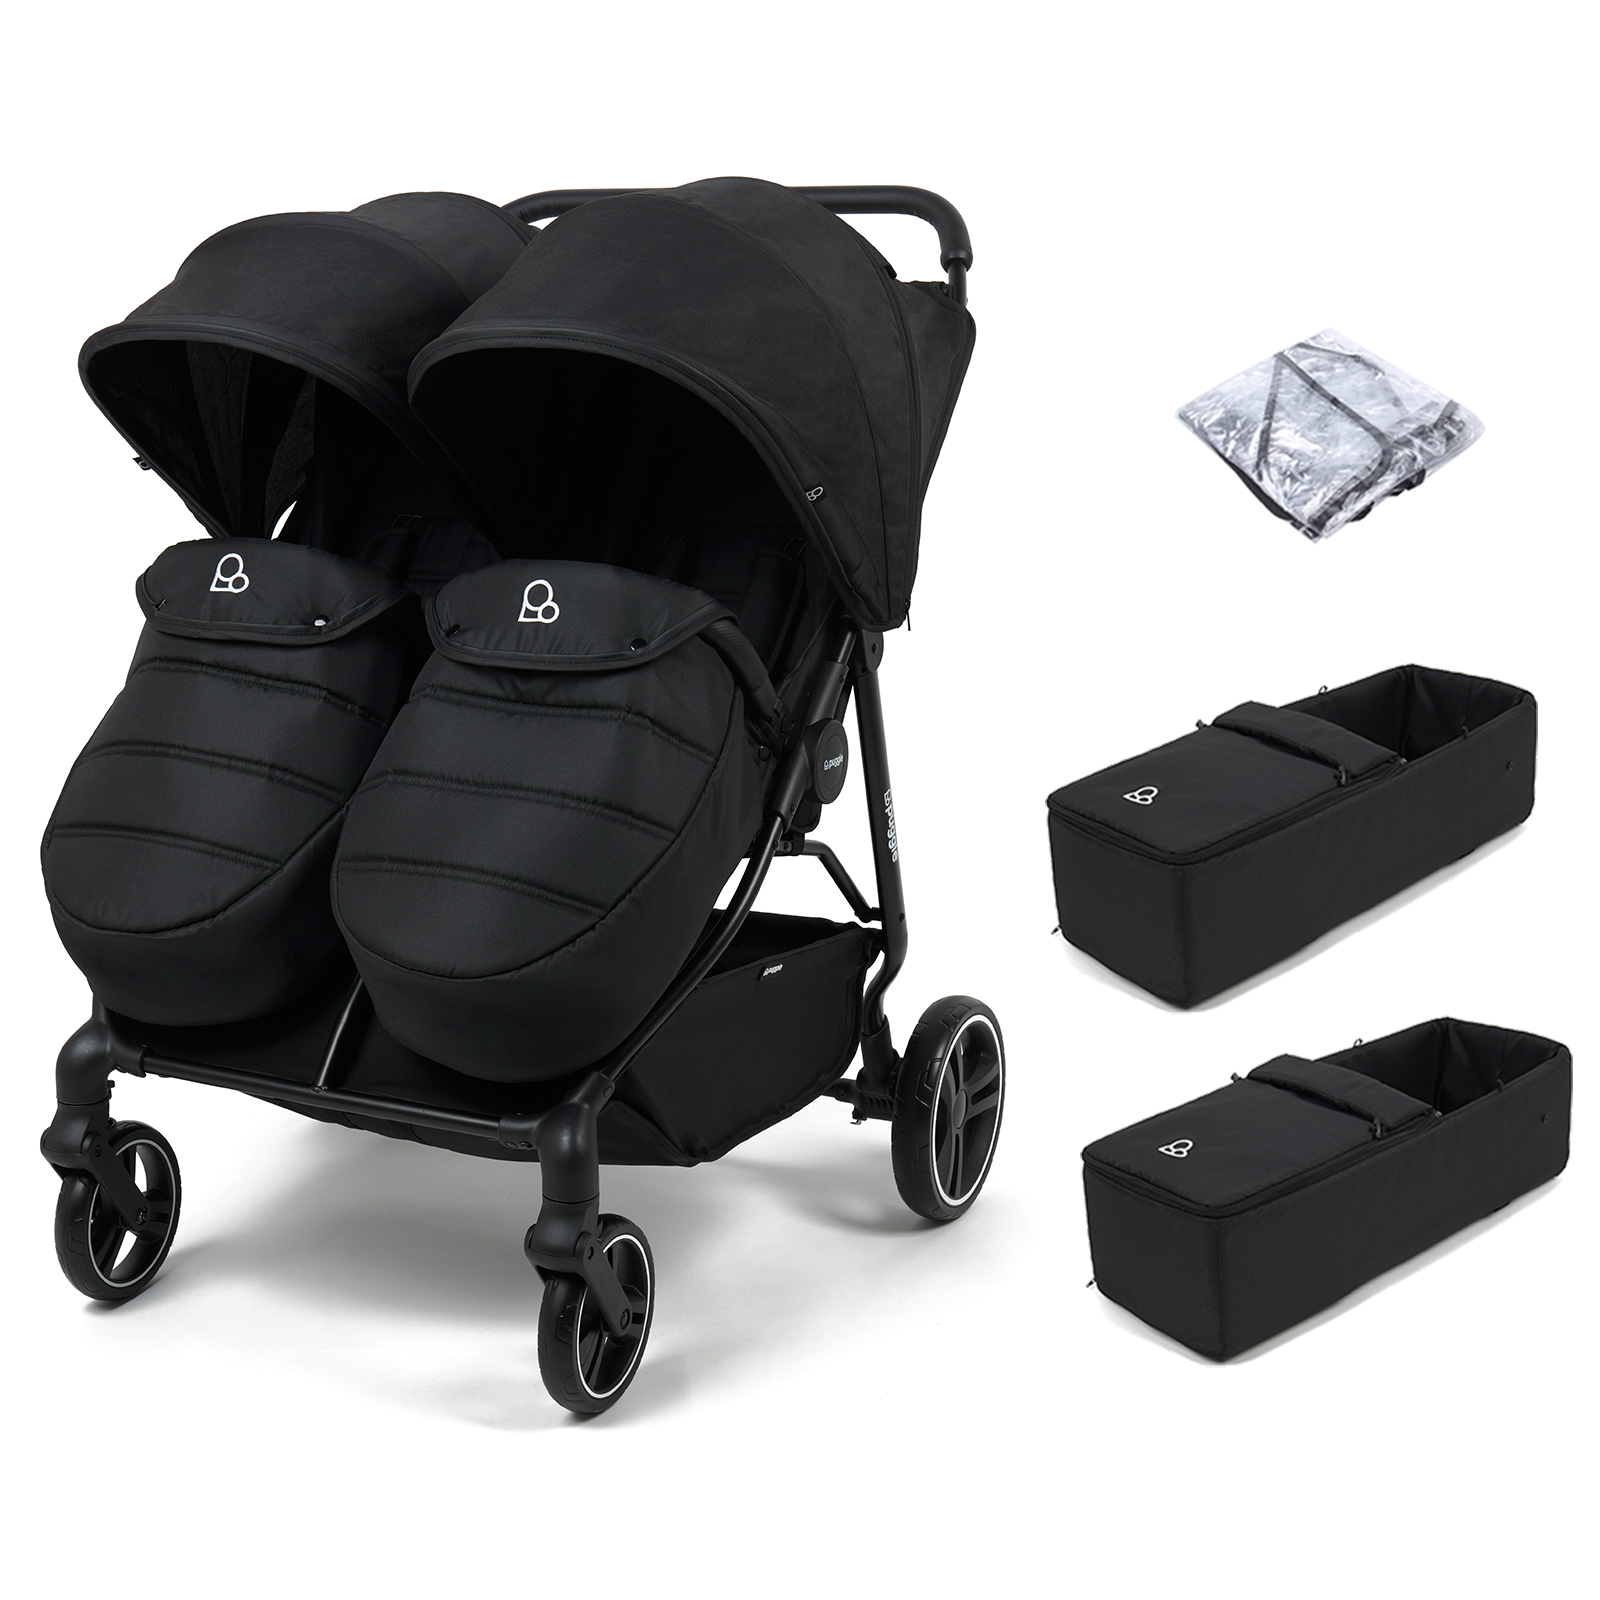 Puggle Urban City Easyfold Twin Double Pushchair +2 Soft Carrycot - Storm Black